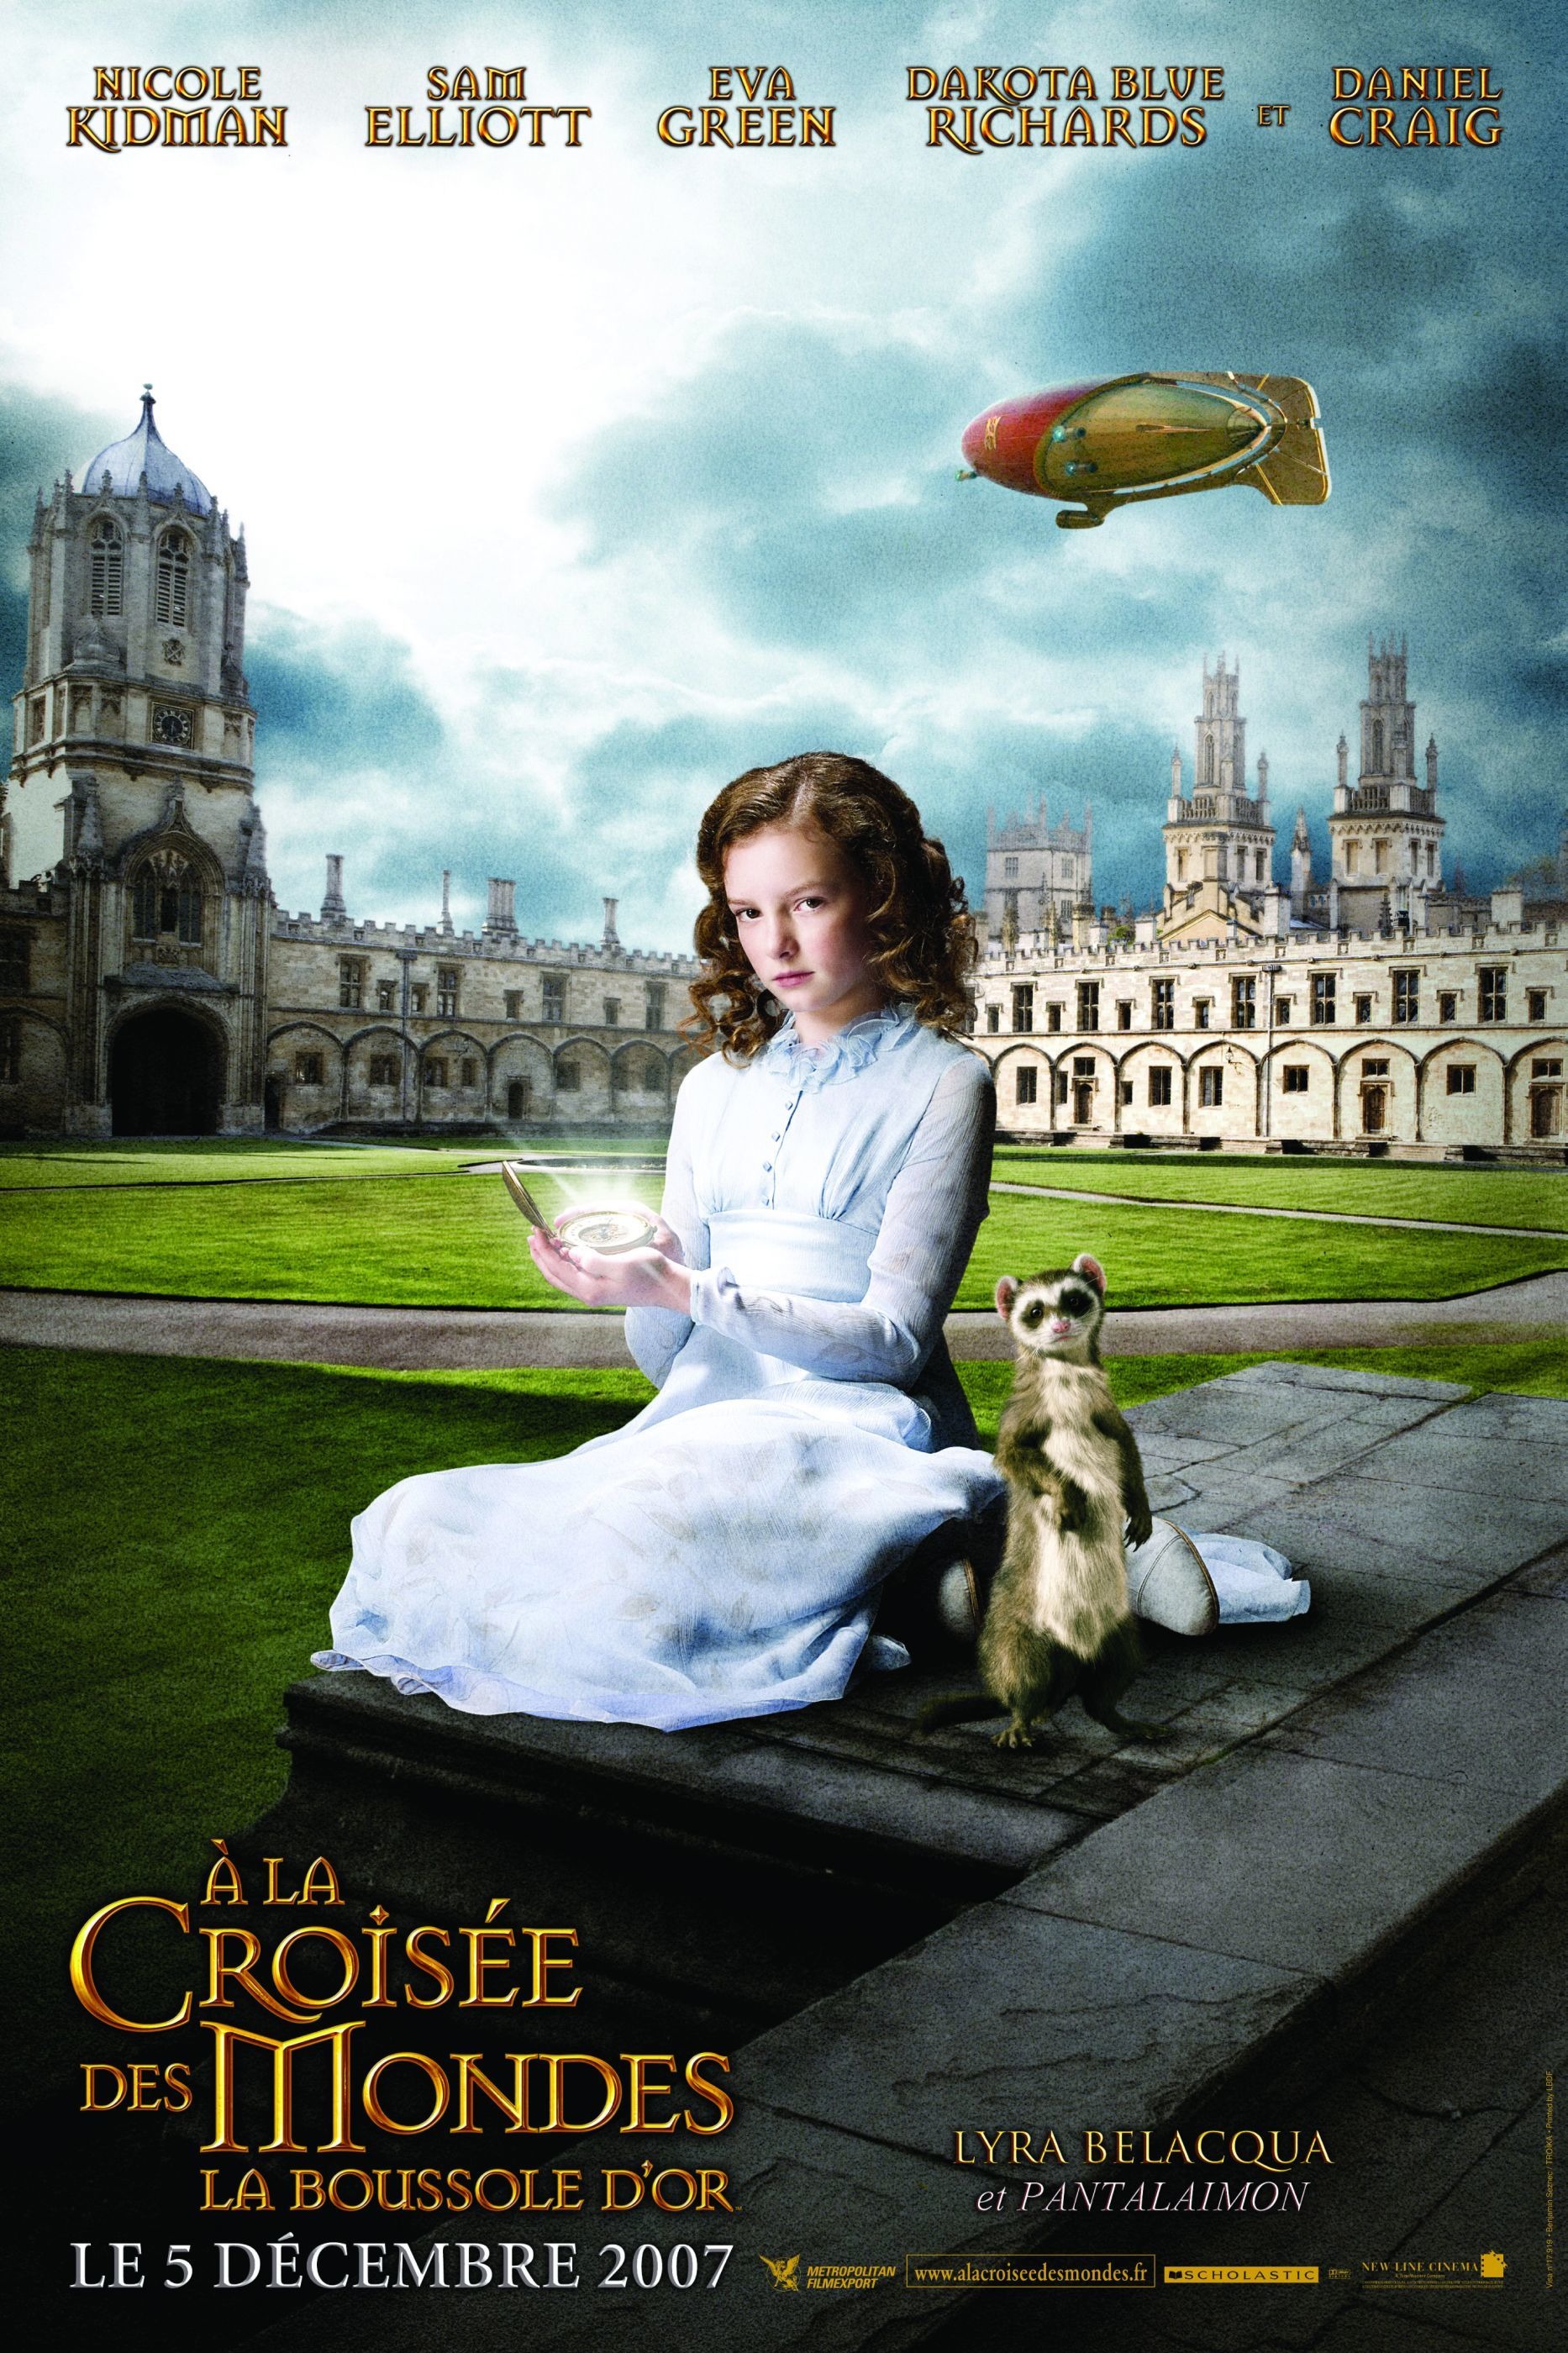 Mega Sized Movie Poster Image for The Golden Compass (#25 of 27)